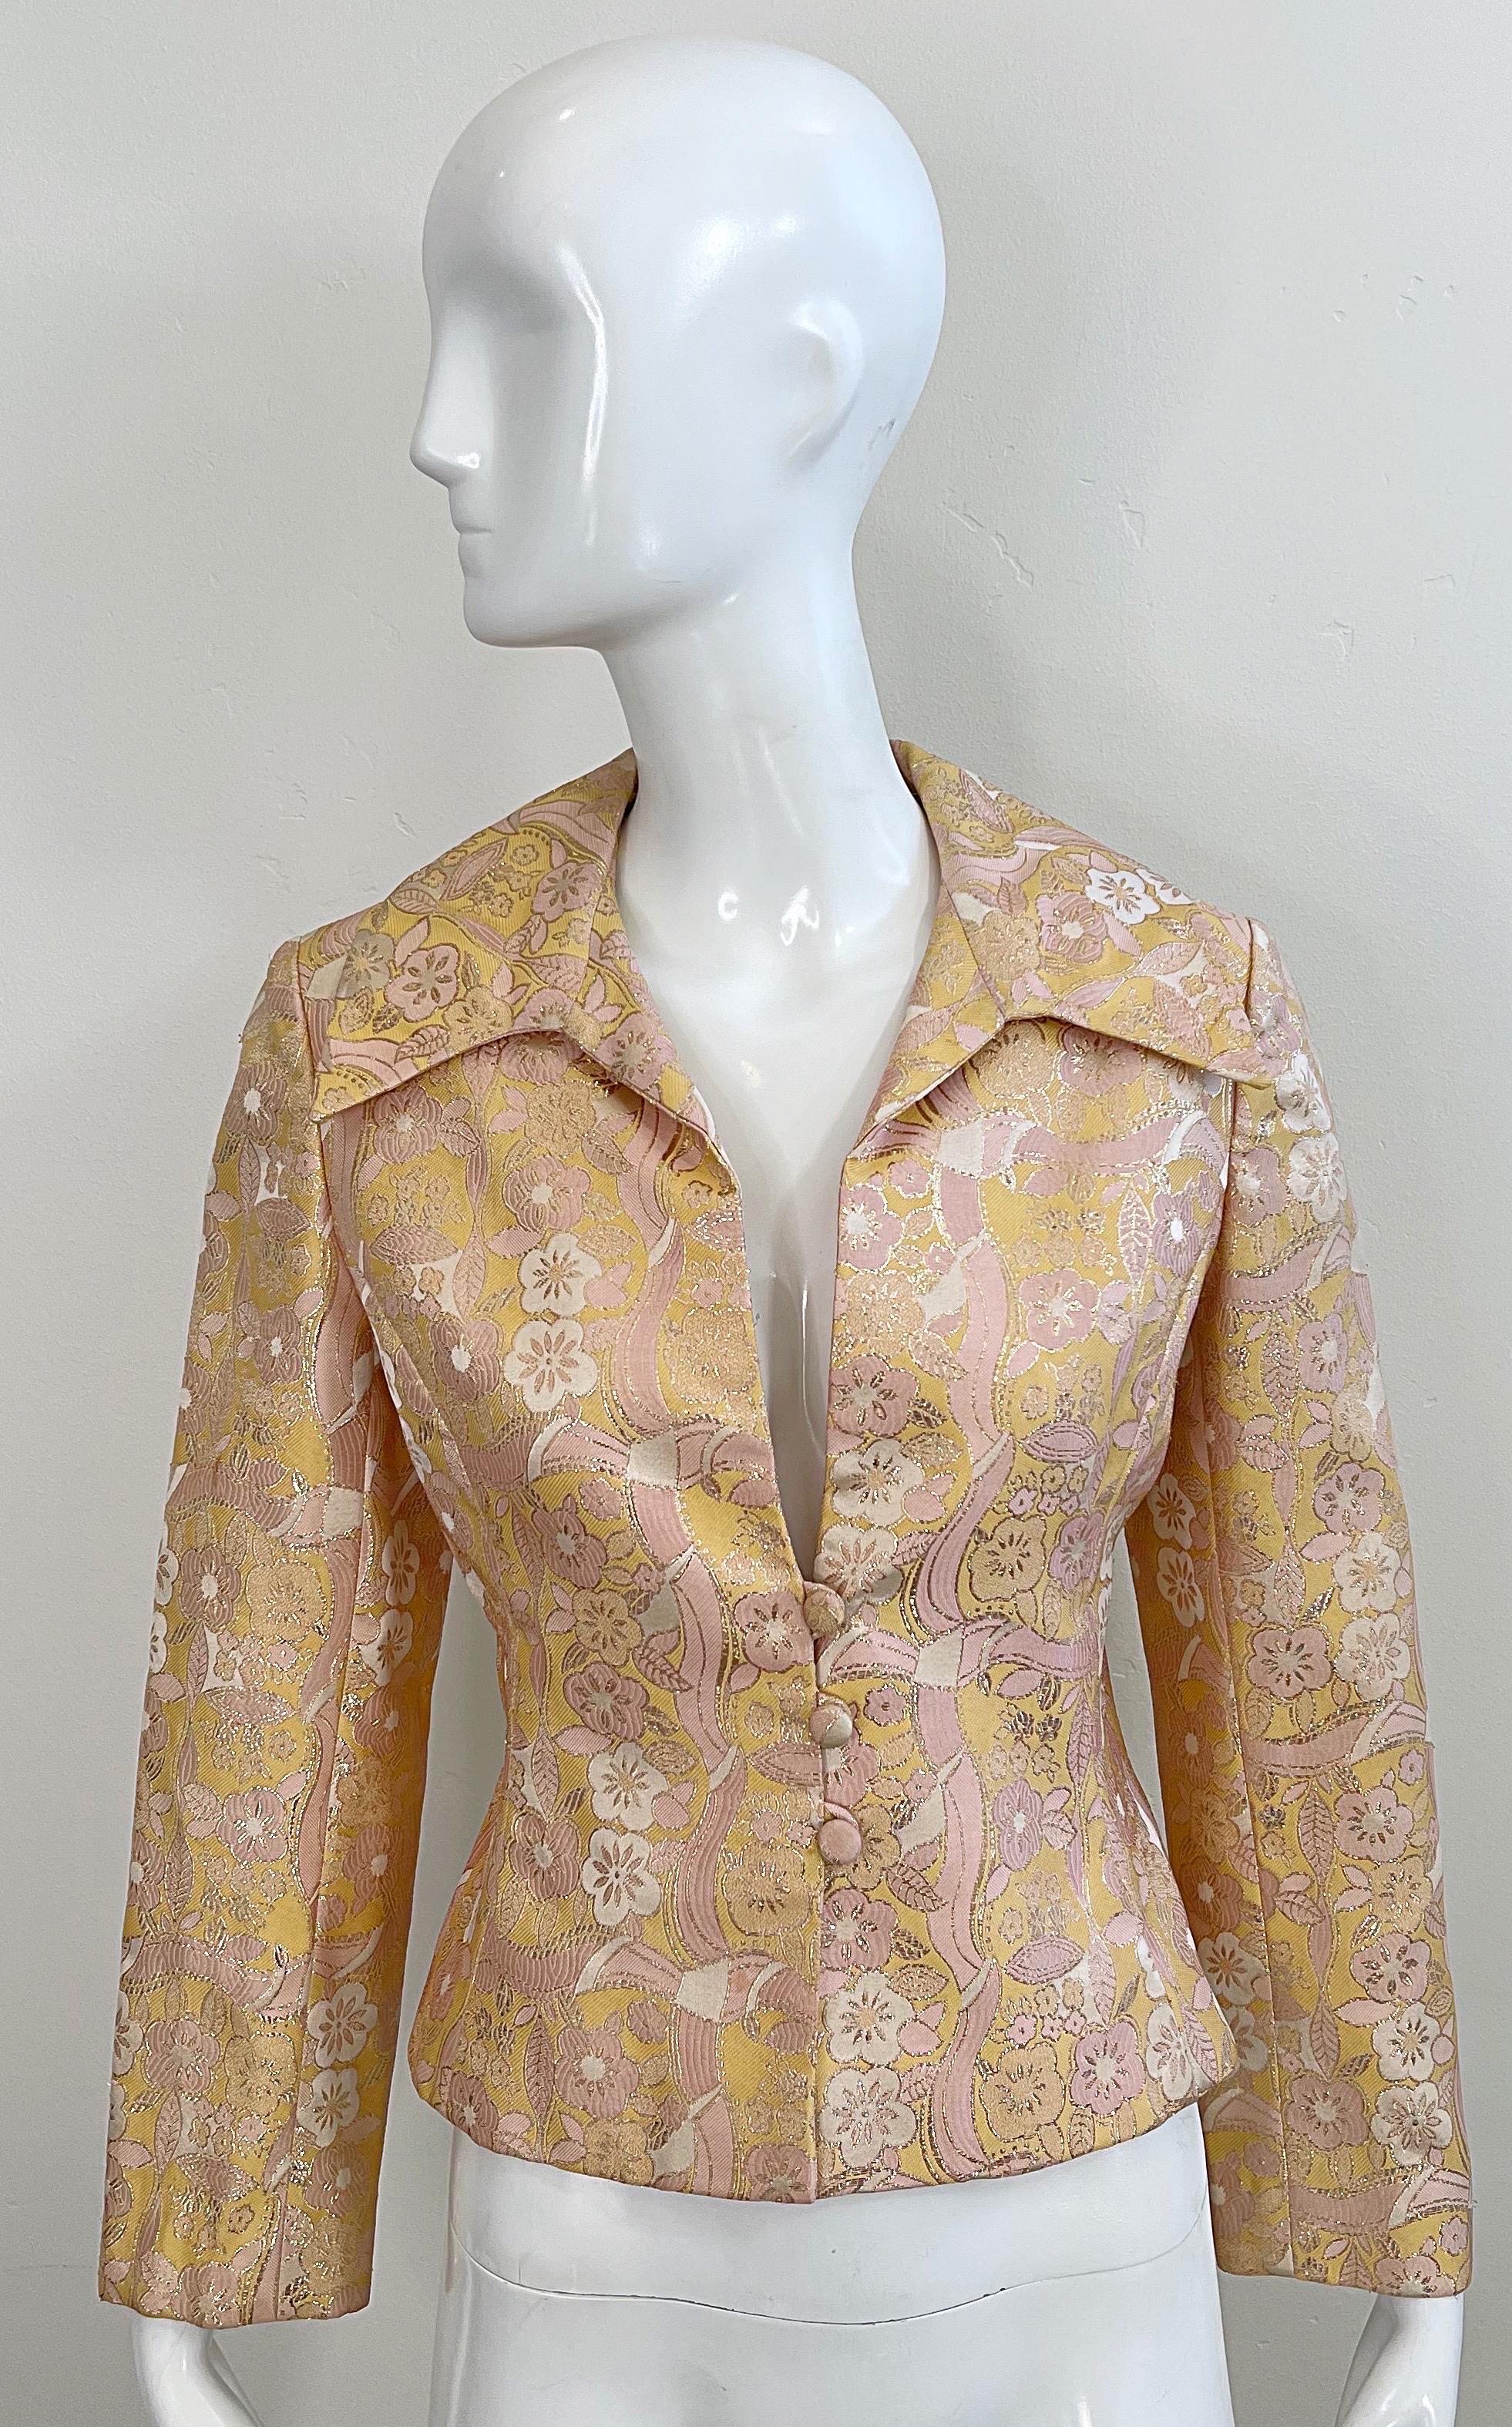 Chic early 1970s MOLLIE PARNIS peach, pink, ivory and gold silk brocade jacket or blouse ! Exaggerated lapels with three fabric covered buttons down the front. Metallic flower print throughout. Perfect layered over a blouse or alone.
In great